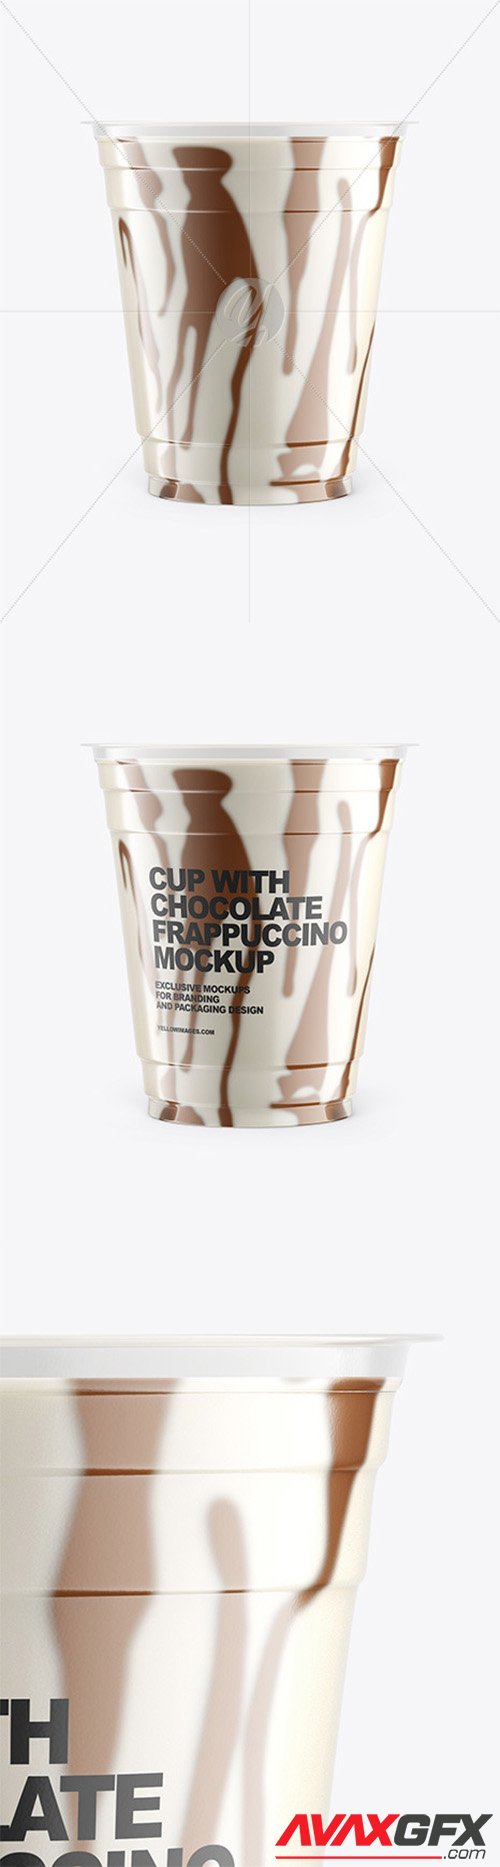 Cup With Chocolate Frappuccino Mockup 67987